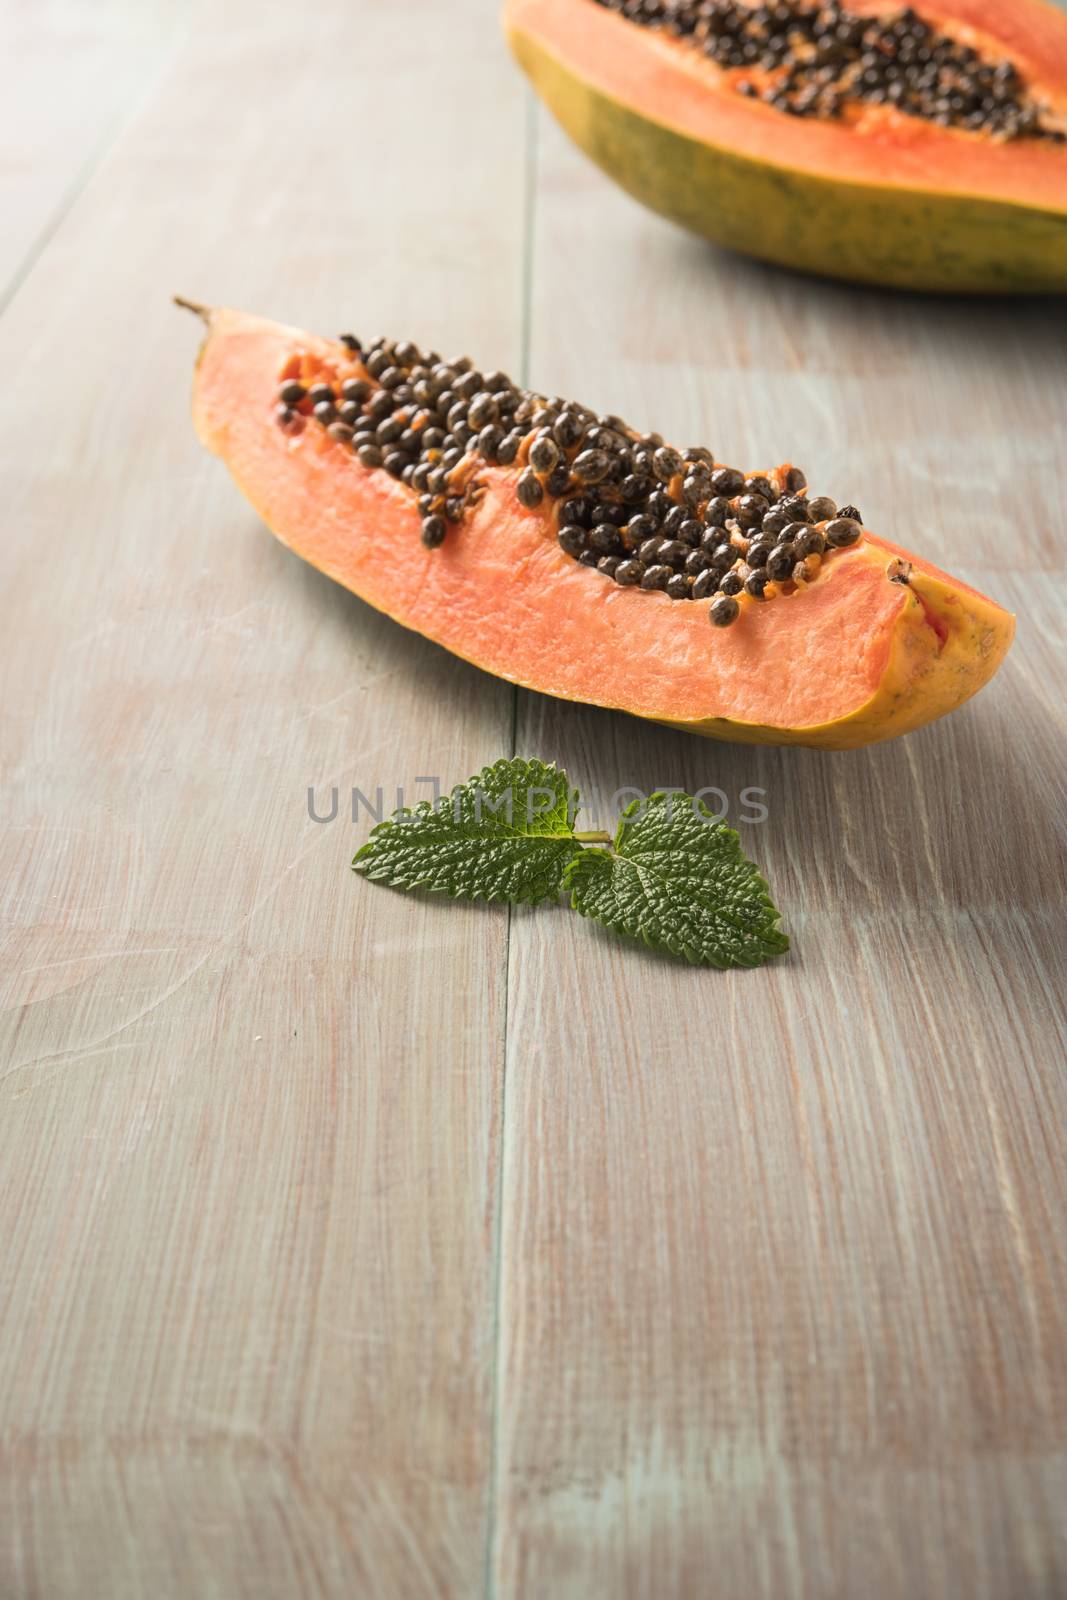 Sliced fresh papaya on wooden background. Top view with copy spa by AnaMarques